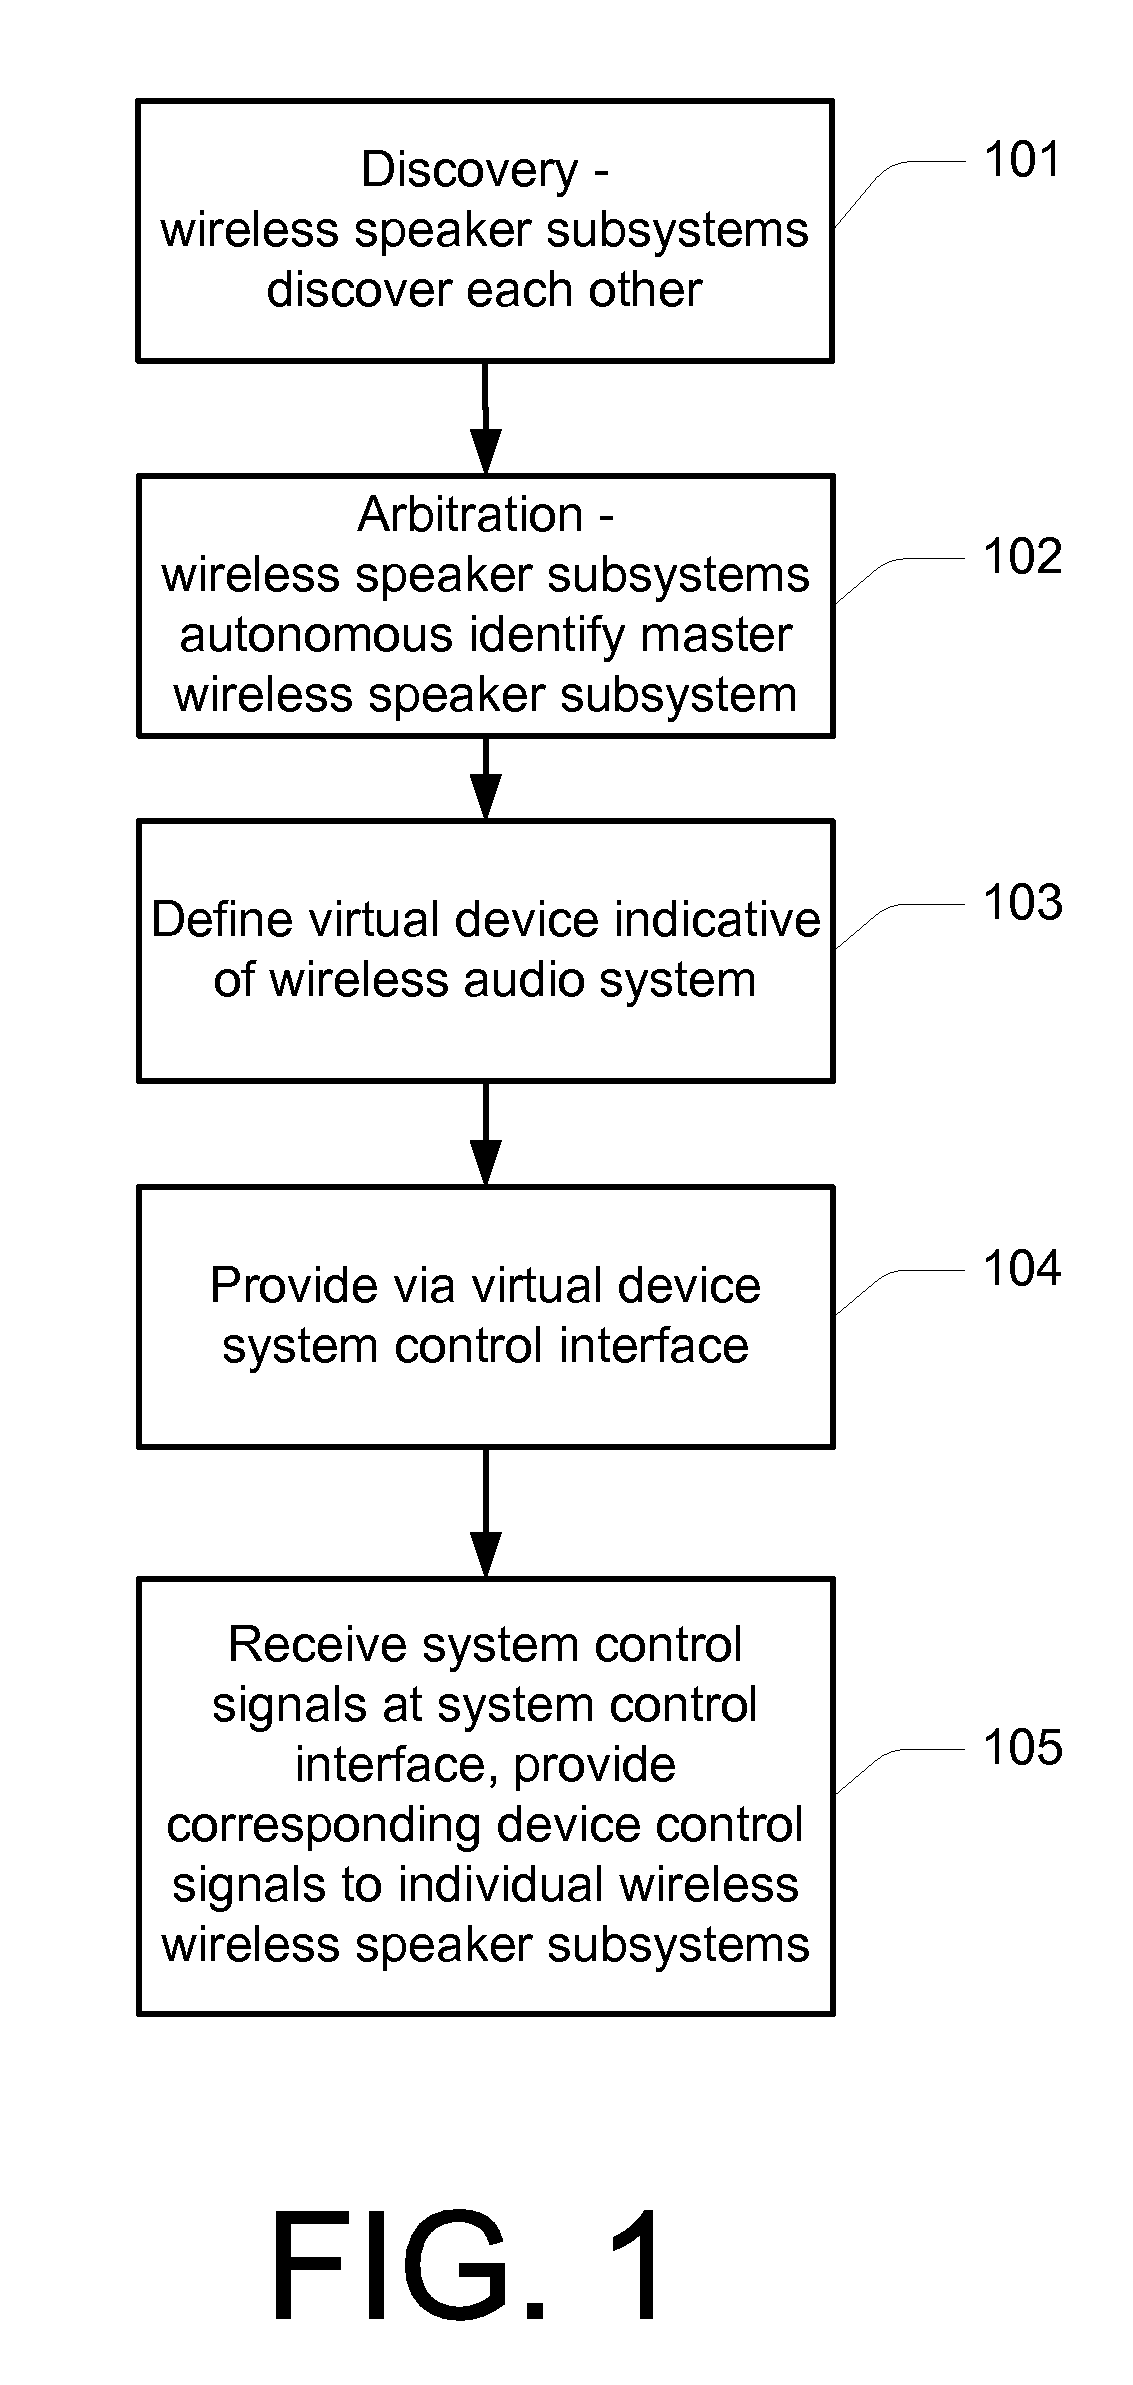 Unification of multimedia devices